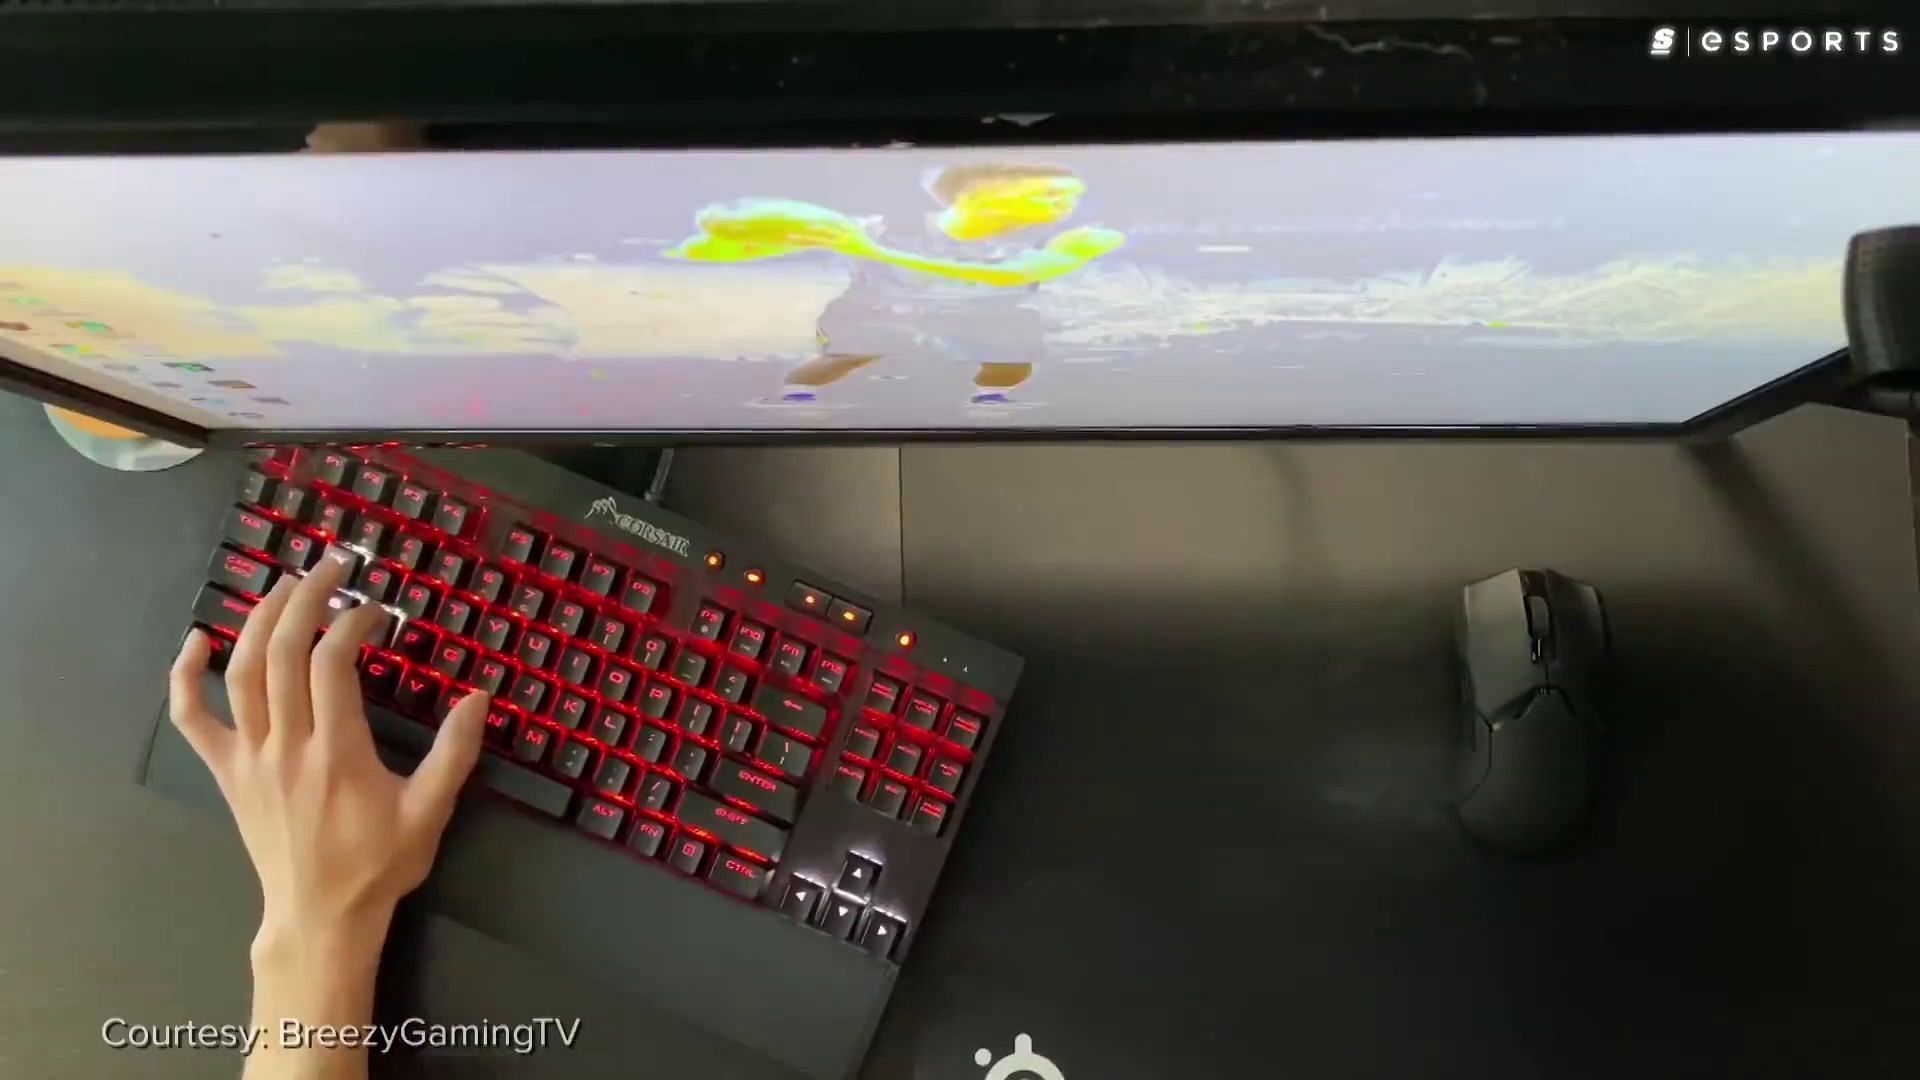 Tilting the keyboard rests the palm more comfortably (Image via YouTube/theScoreesports)